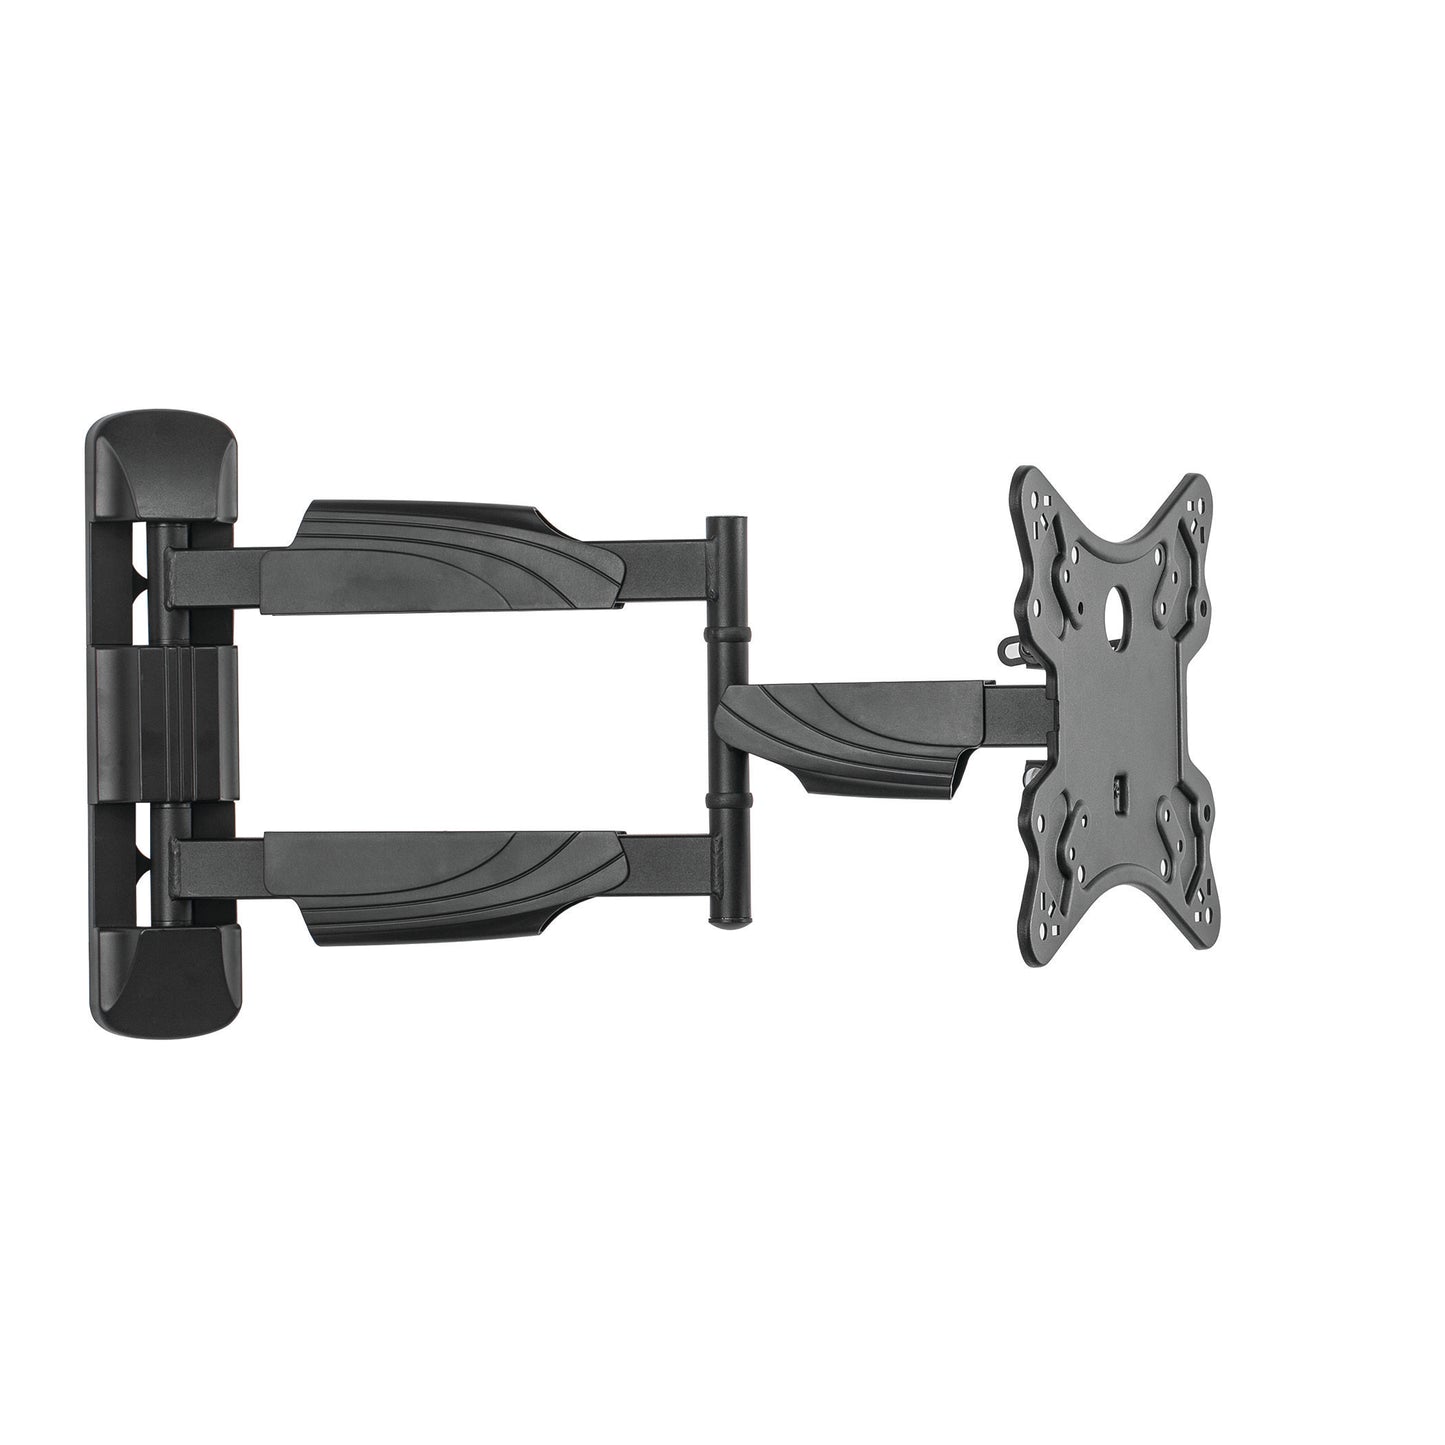 Fellowes® Monitor Arm - Wall Mount - Full Motion Tv